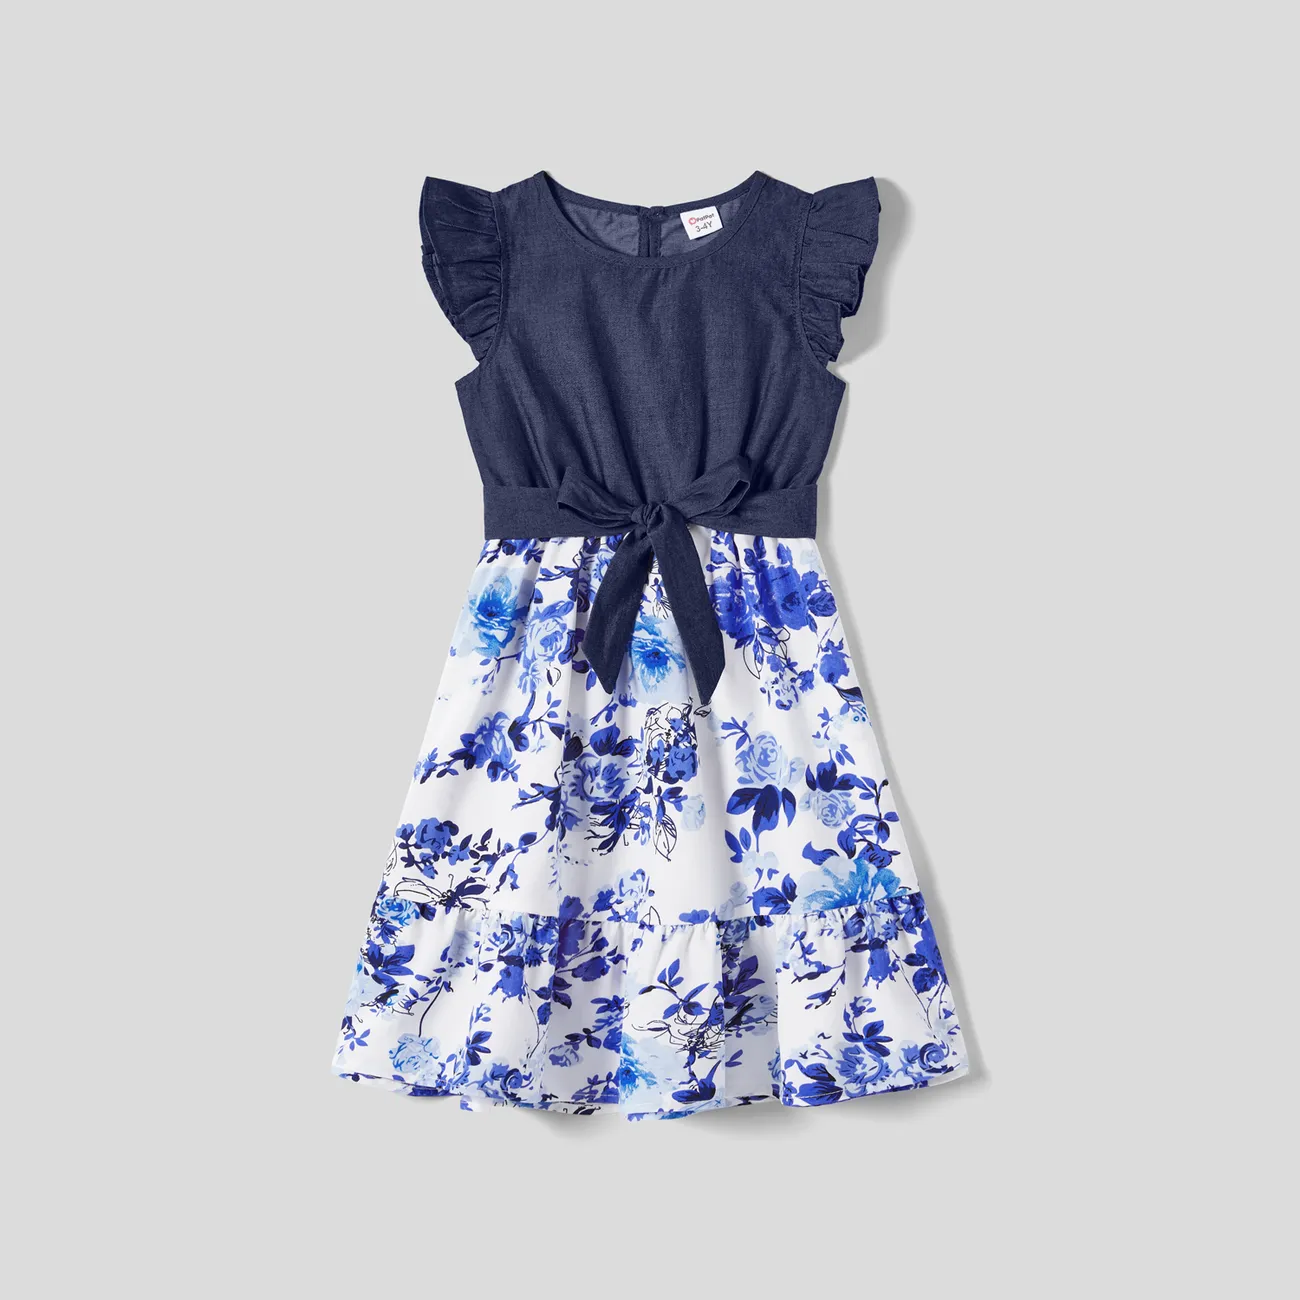 Family Matching Allover Floral Print Belted Short-sleeve Dresses and Shirts Sets Blue big image 1